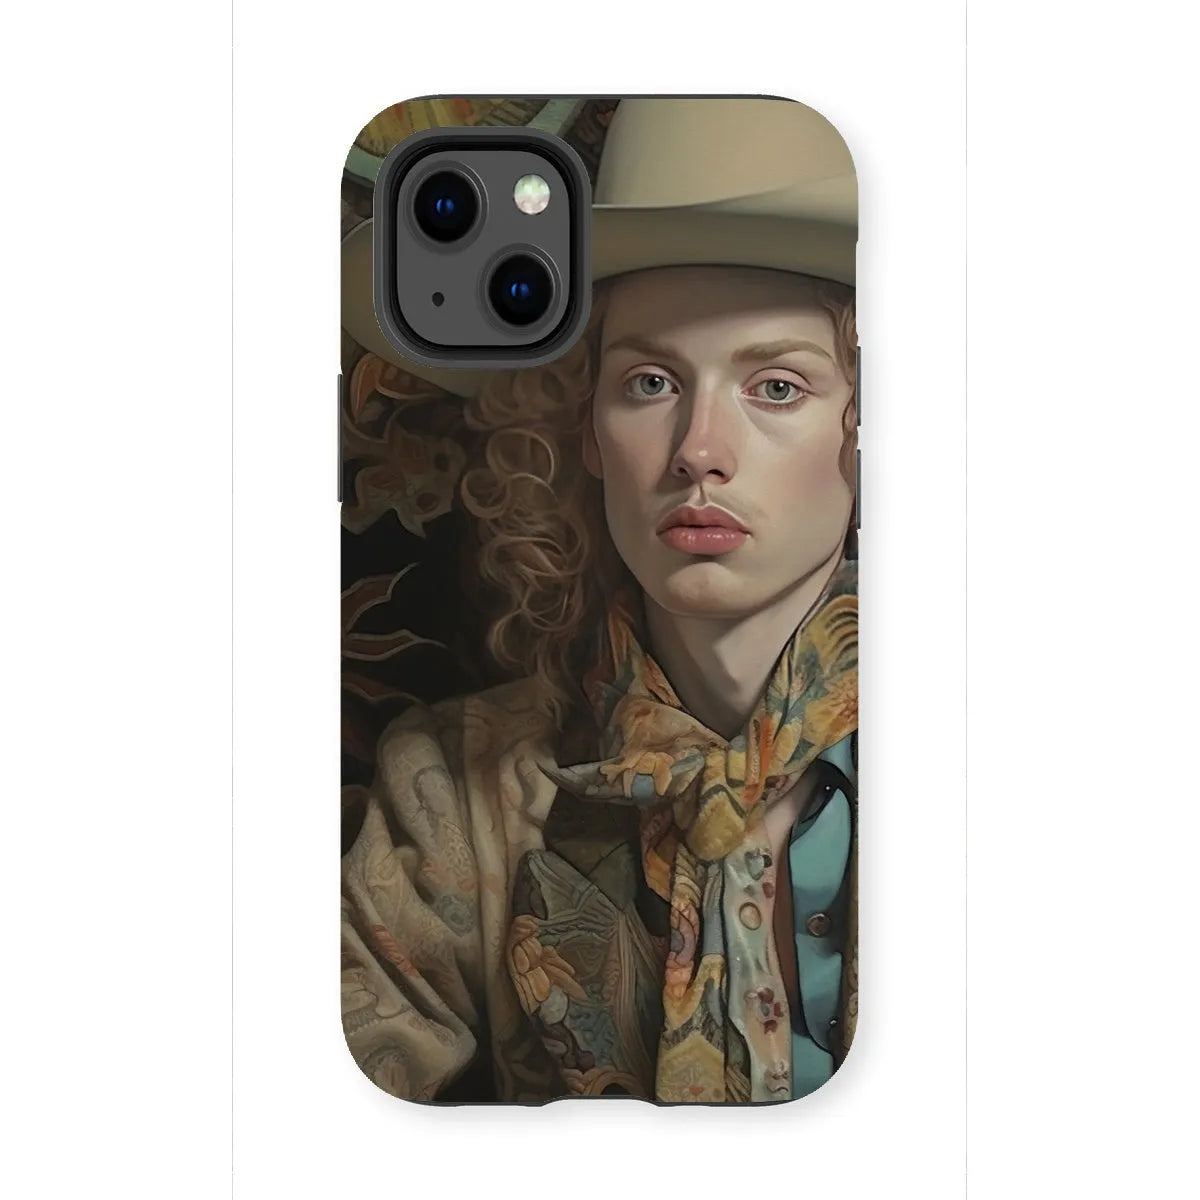 Ollie The Transgender Cowboy - F2m Dandy Outlaw Phone Case - Iphone 13 Mini / Matte - Mobile Phone Cases - Aesthetic Art